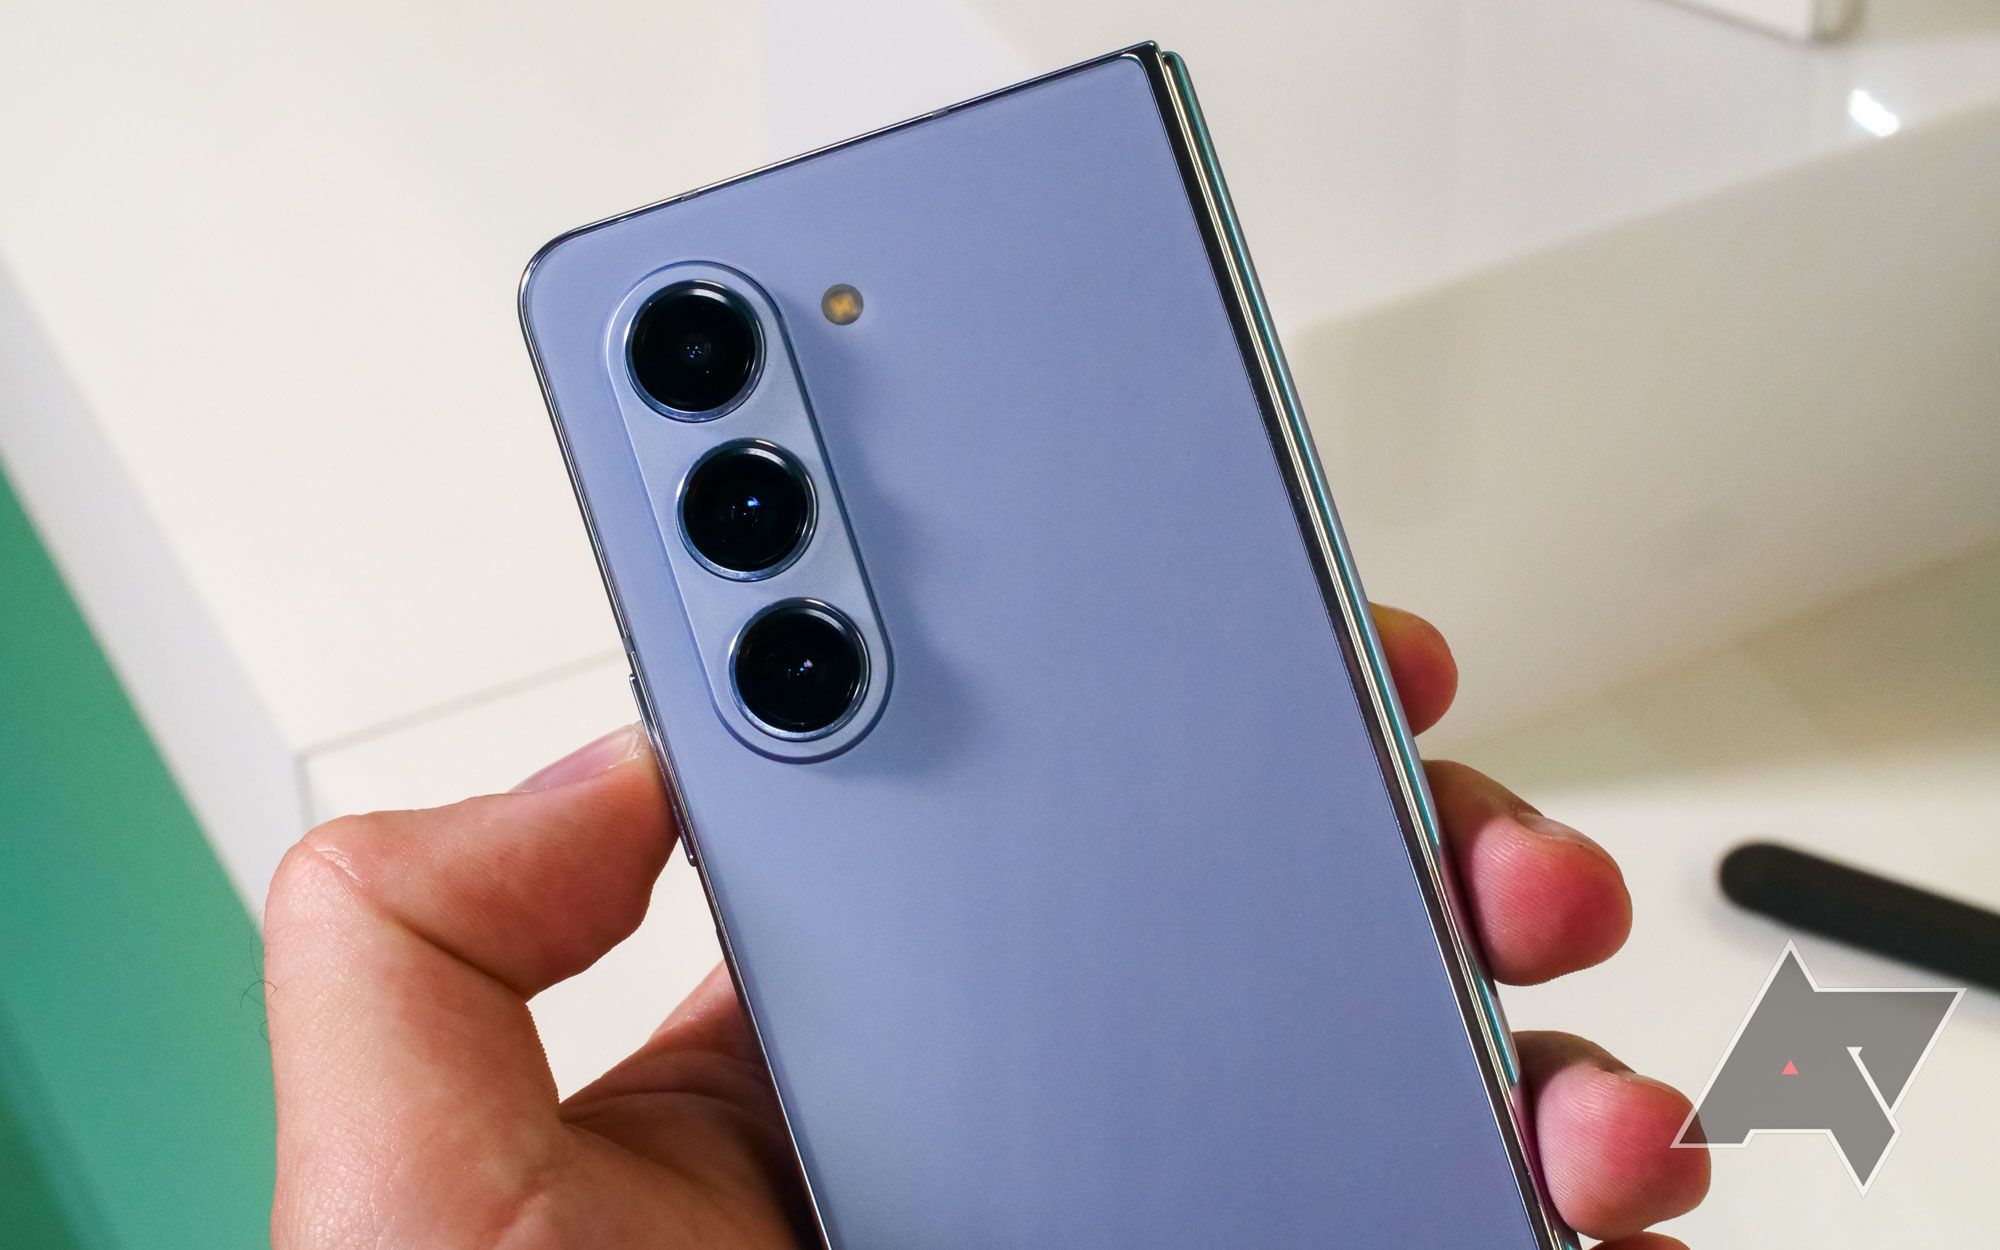 Blue Samsung Galaxy Z Fold 5 is held to show camera array